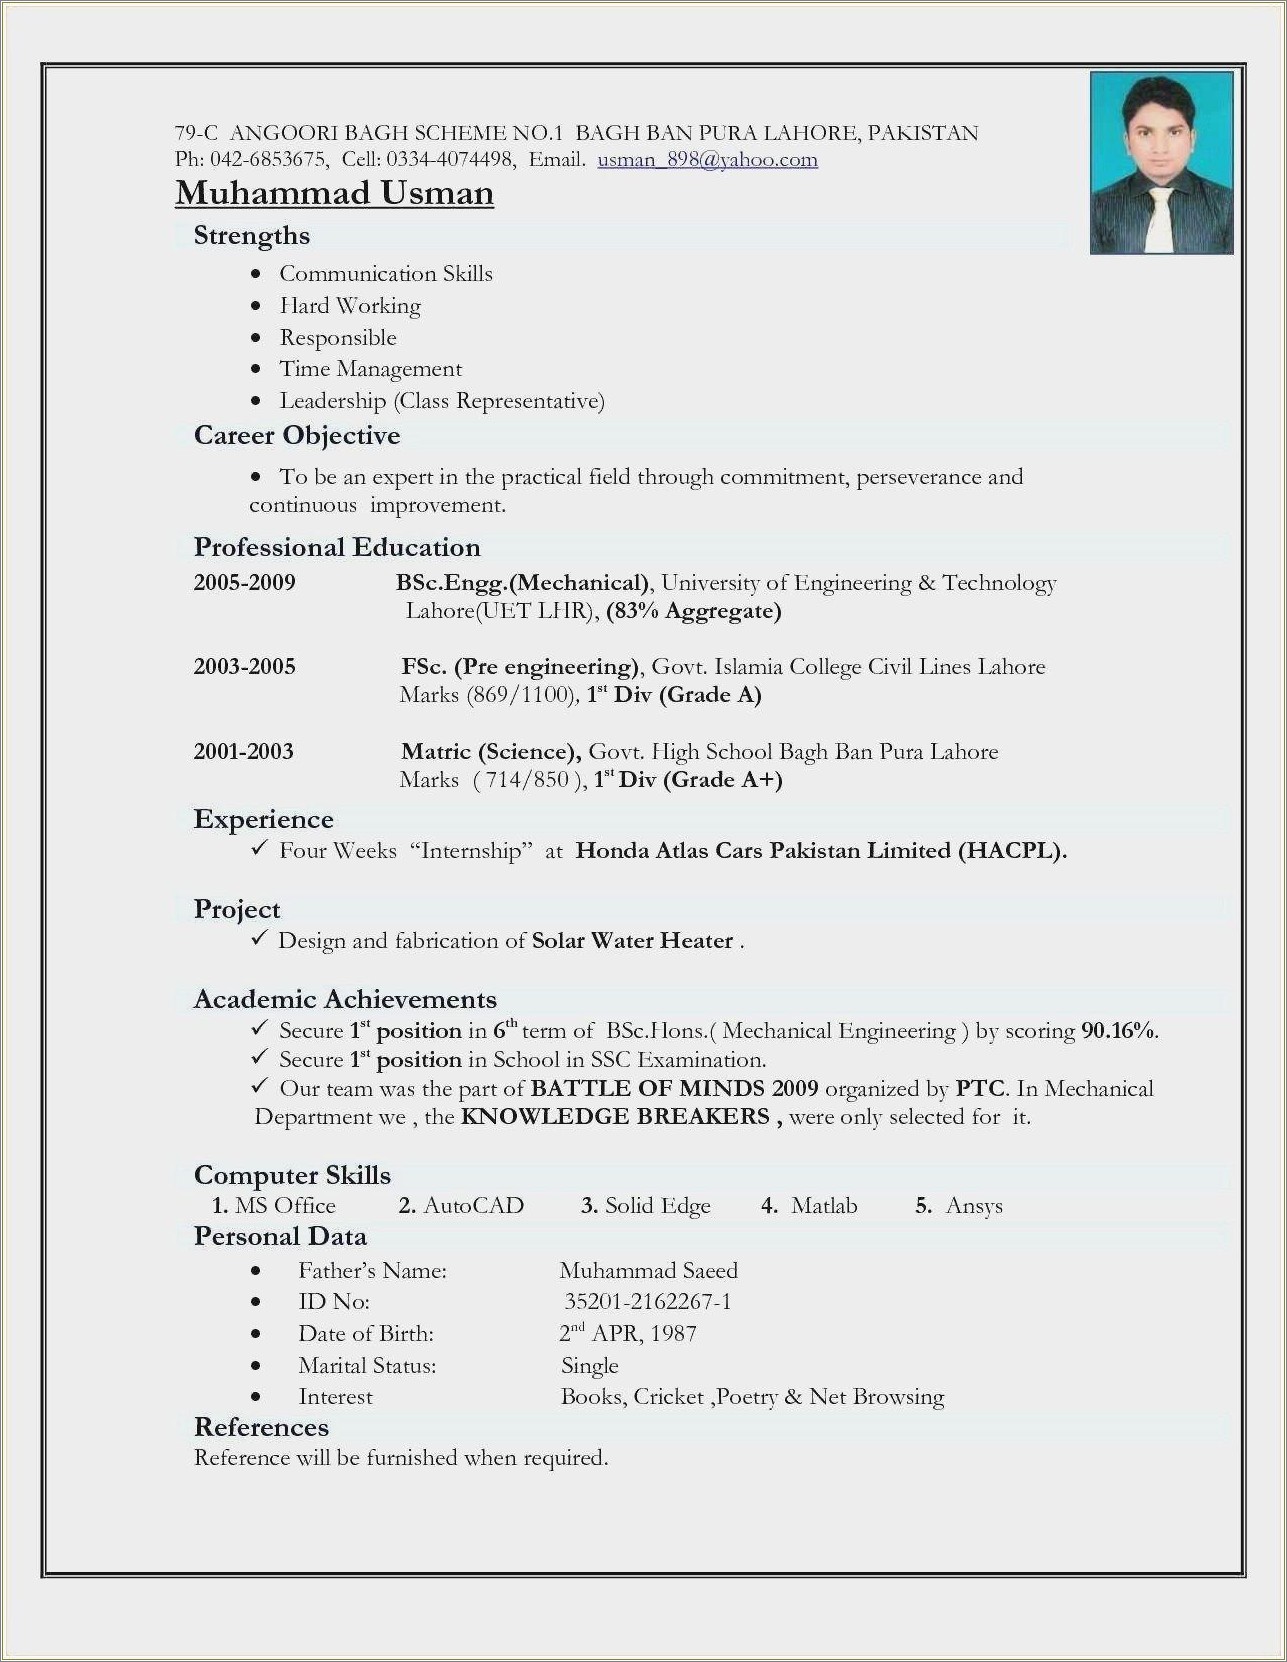 Resume Summary Examples For Engineering Freshers